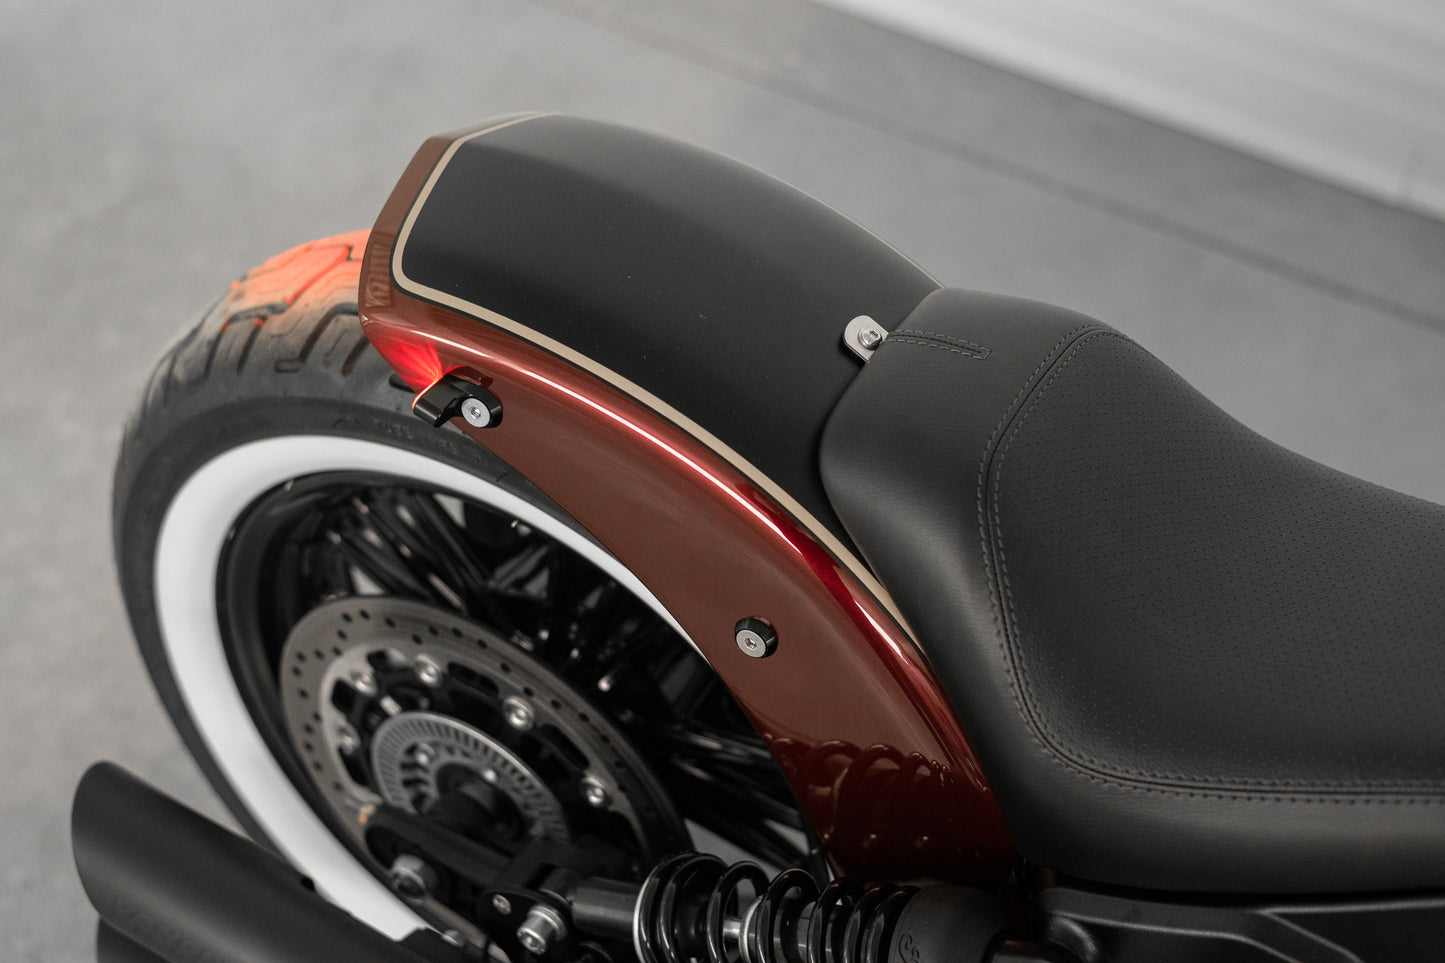 Harley Davidson motorcycle with Killer Custom "Mohawk" led rear taillight/turn signal combo from above grey background